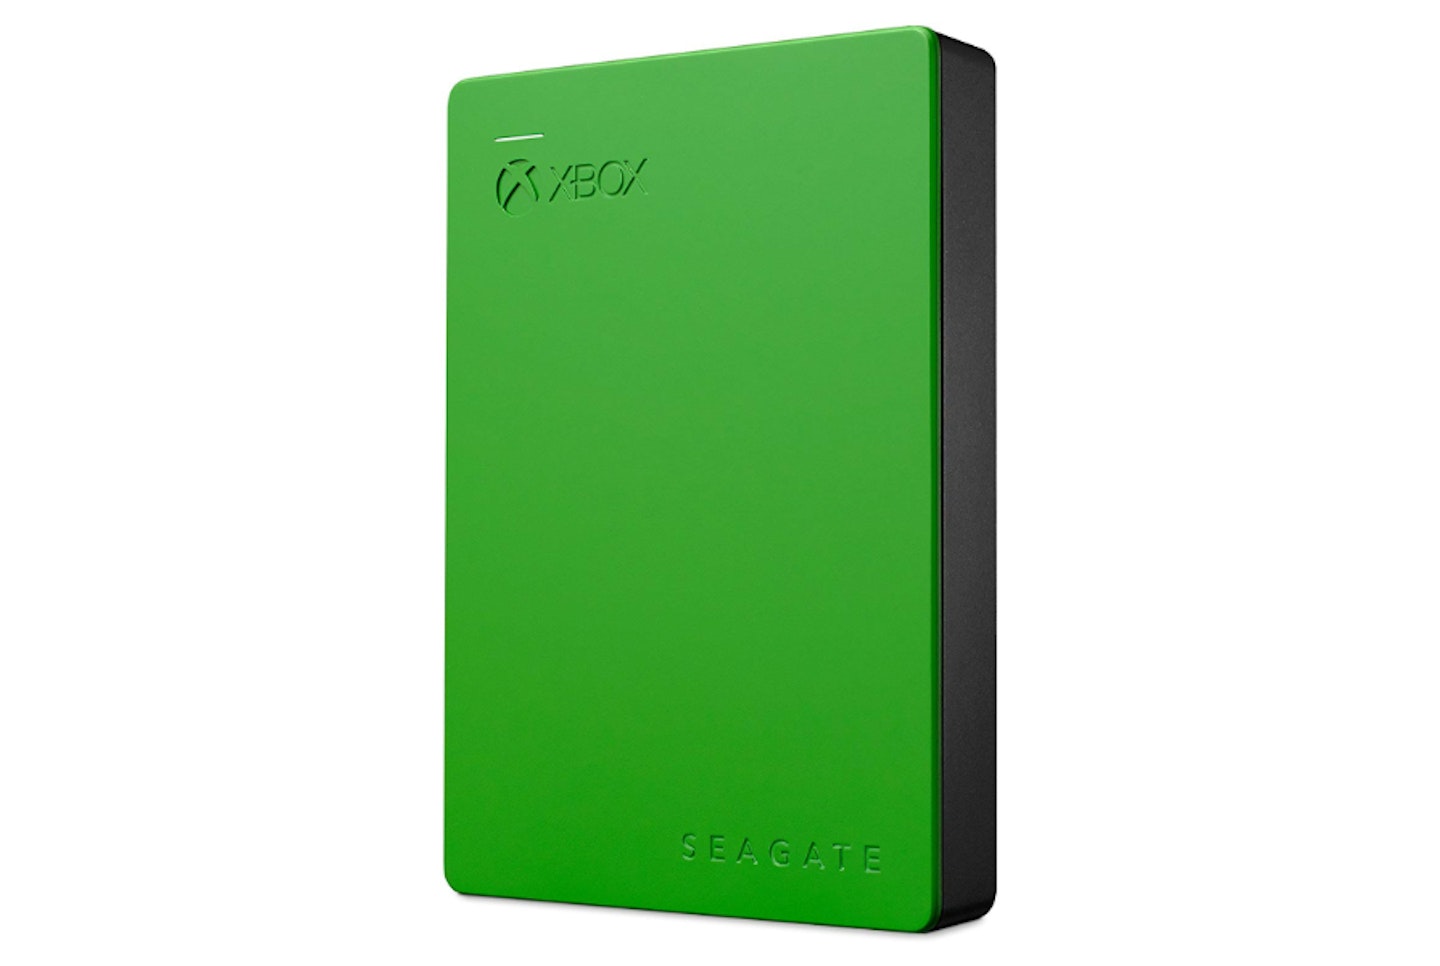 Seagate 4 TB Game Drive External Hard Drive for Xbox One